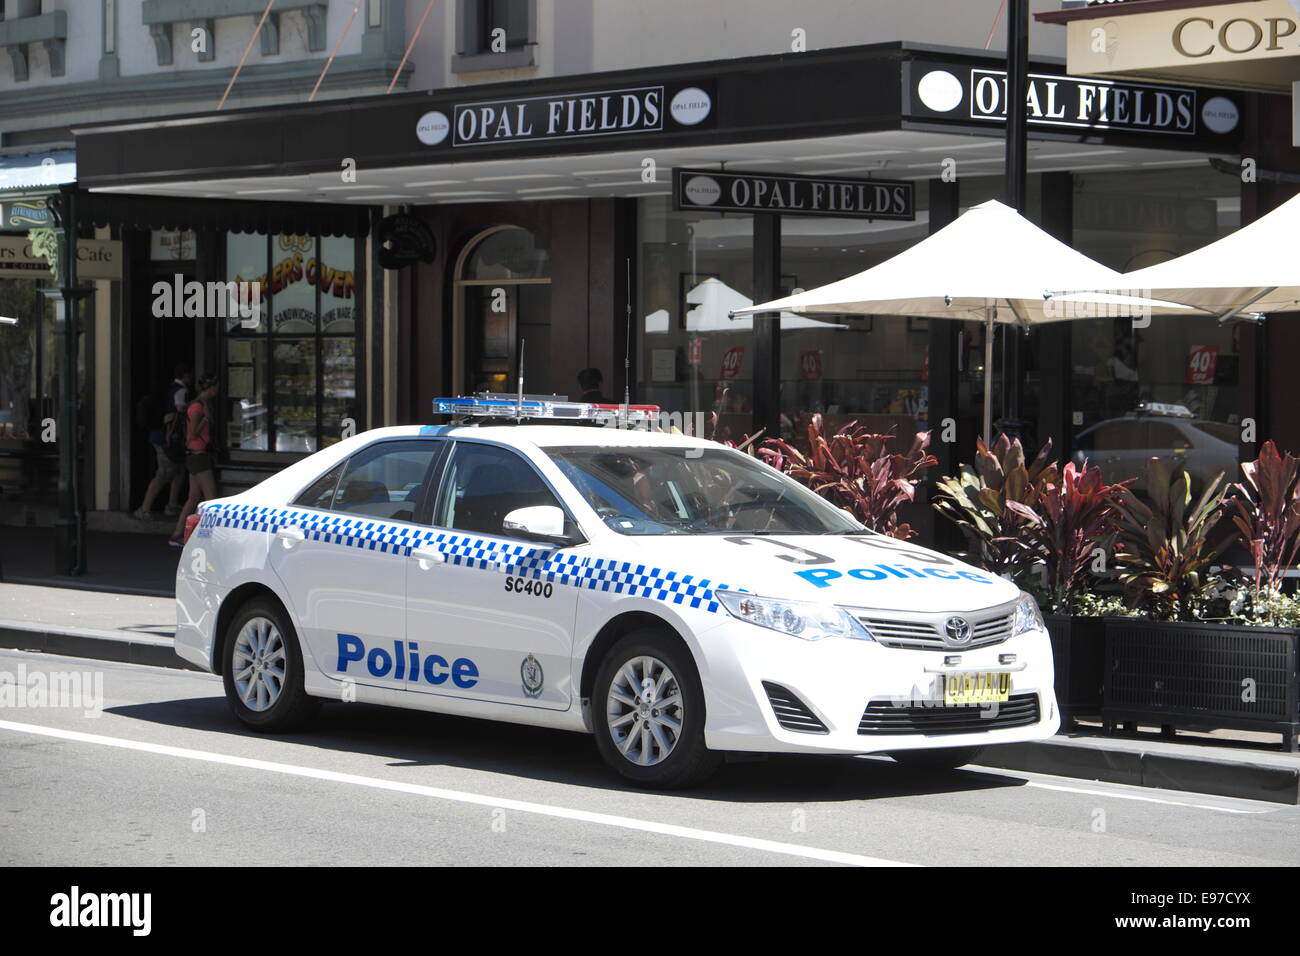 new south wales sydney police vehicle in the Rocks area of sydney,australia Stock Photo